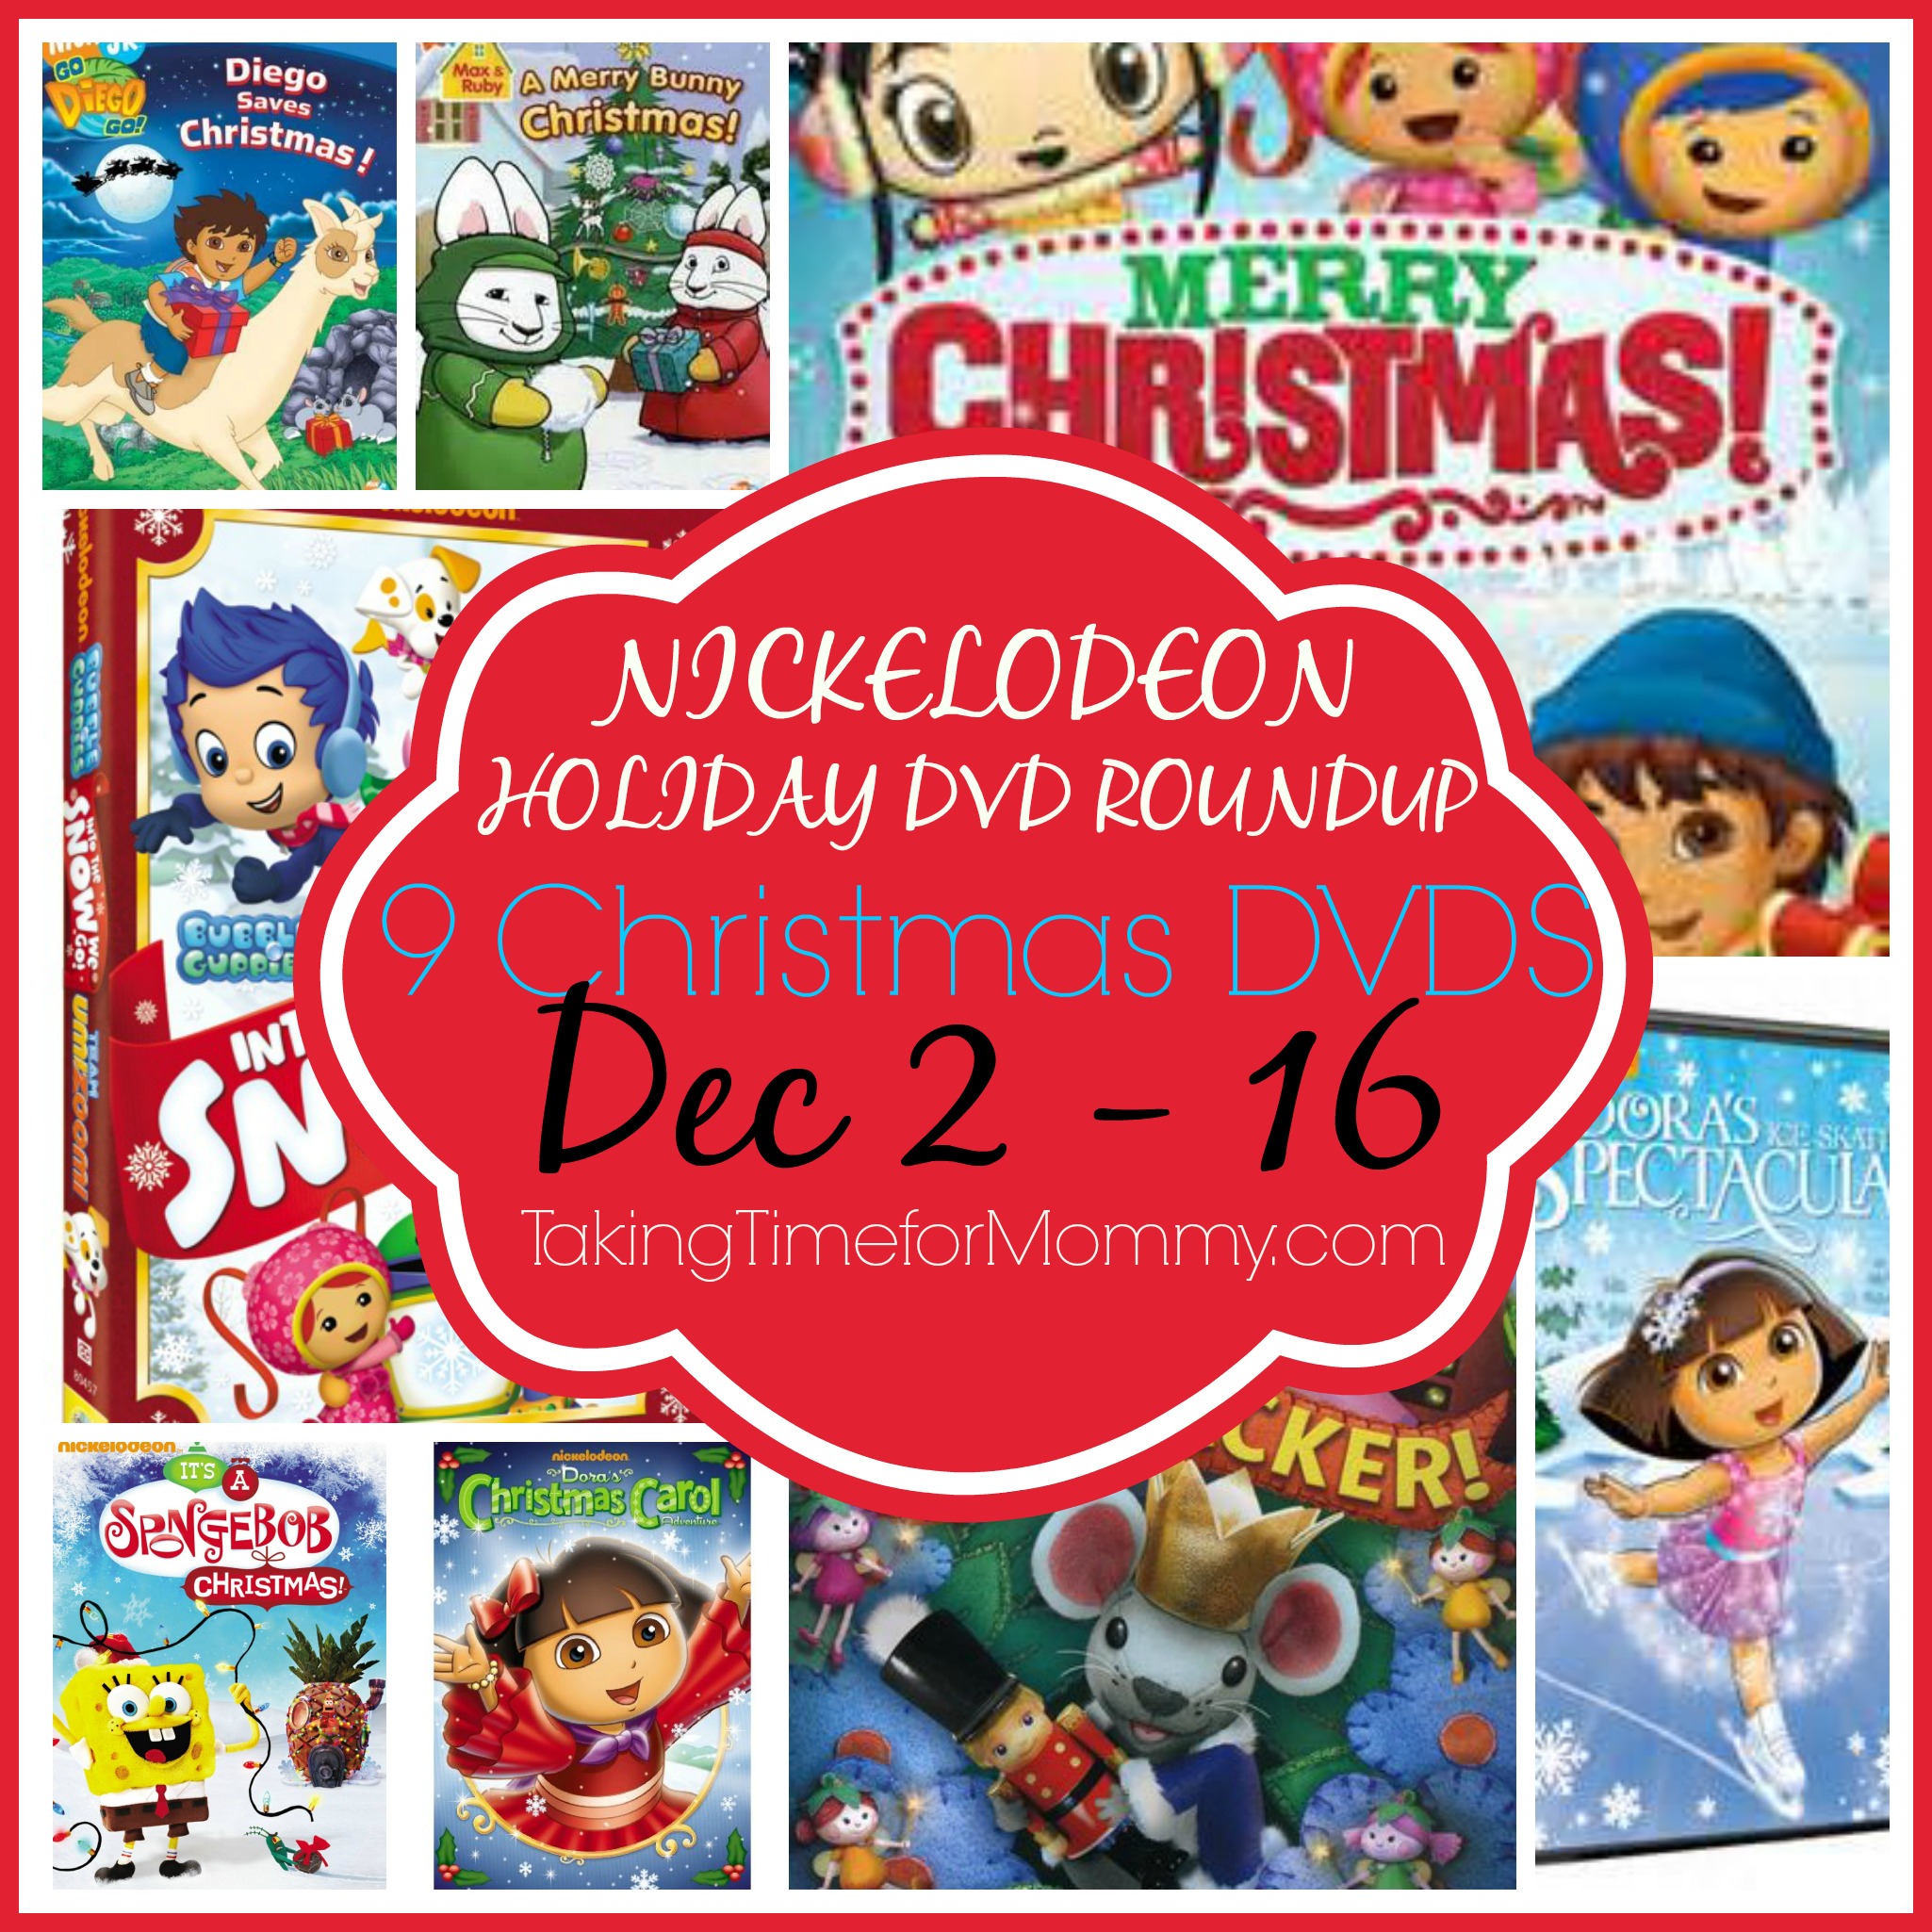 9 Christmas Nickelodeon DVDs Giveaway